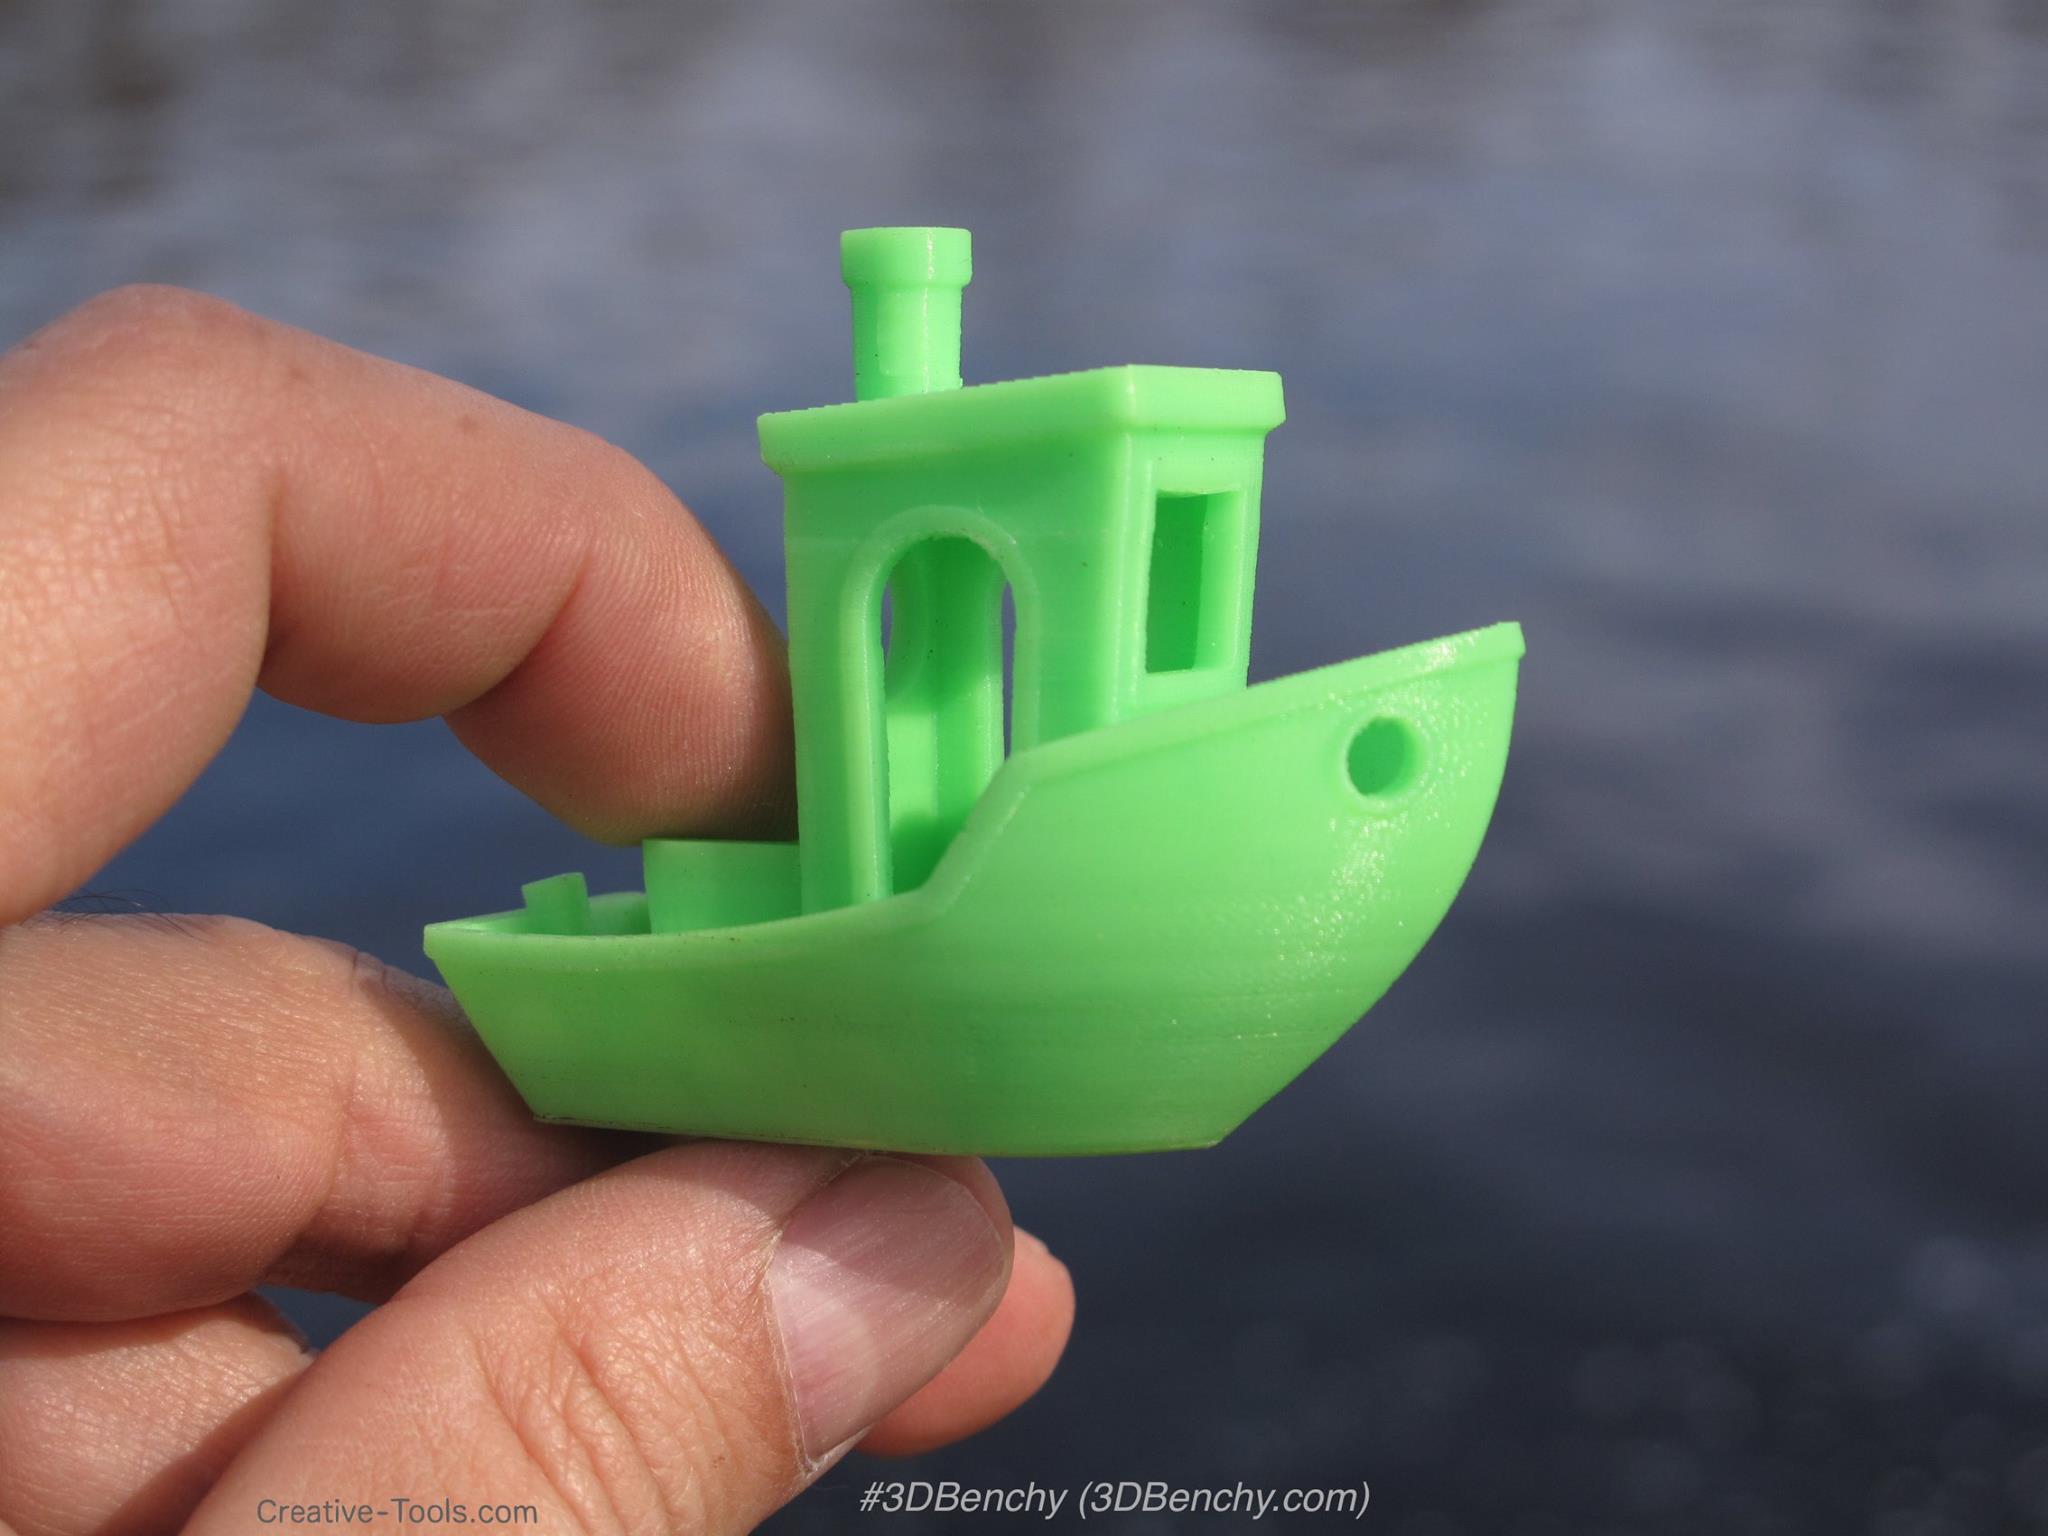 creative-tools-release-3dbenchy-the-coolest-3d-printer-calibration-benchmarking-tool-yet